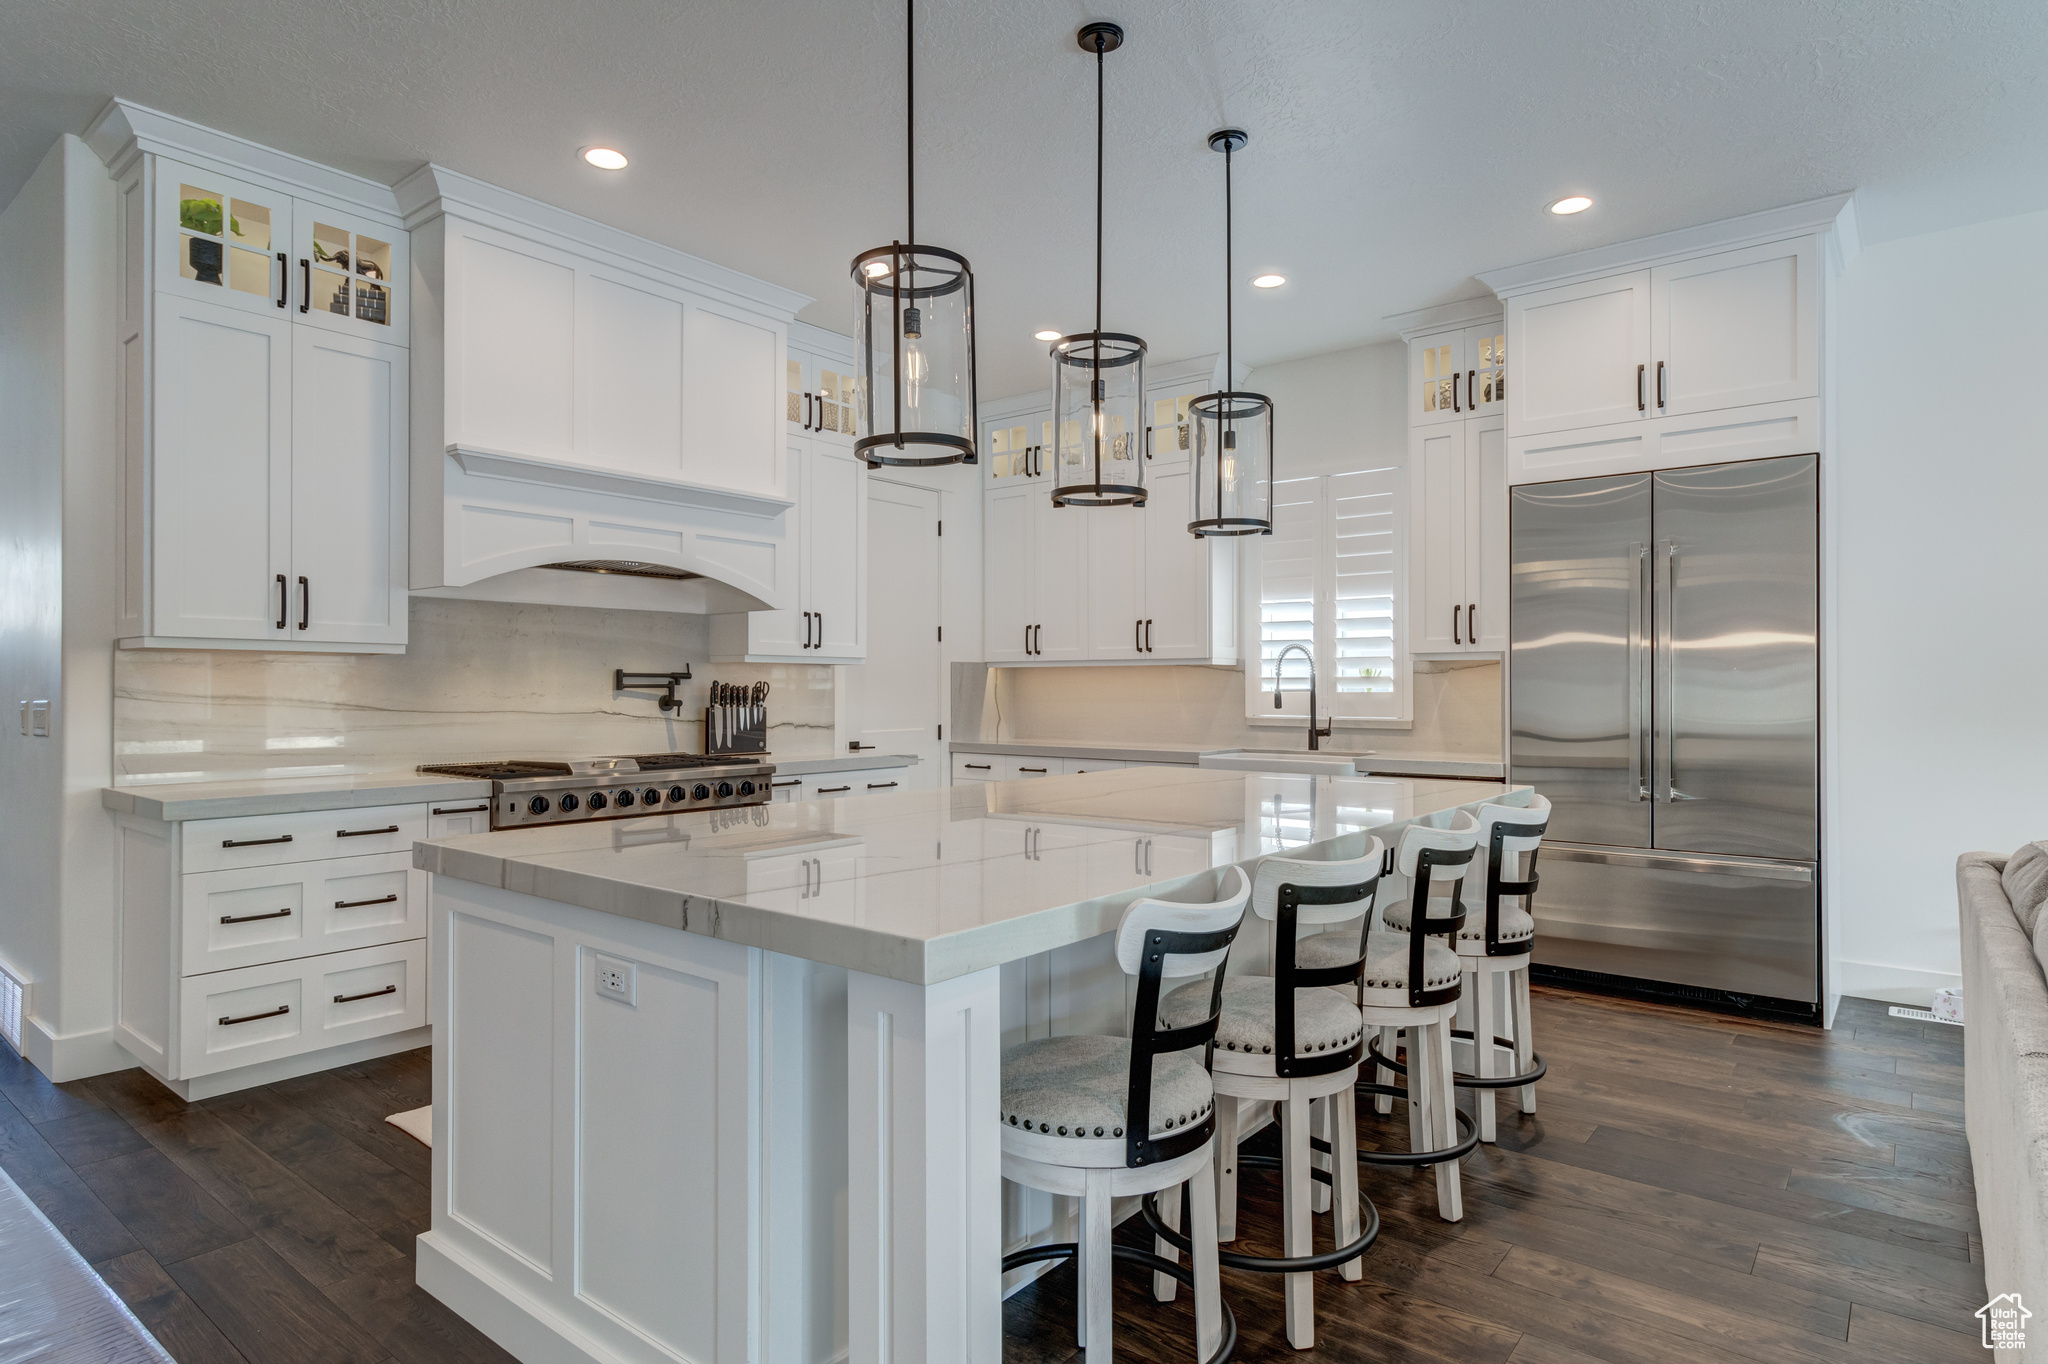 Kitchen with stainless steel built in fridge, decorative light fixtures, white cabinetry, and a center island